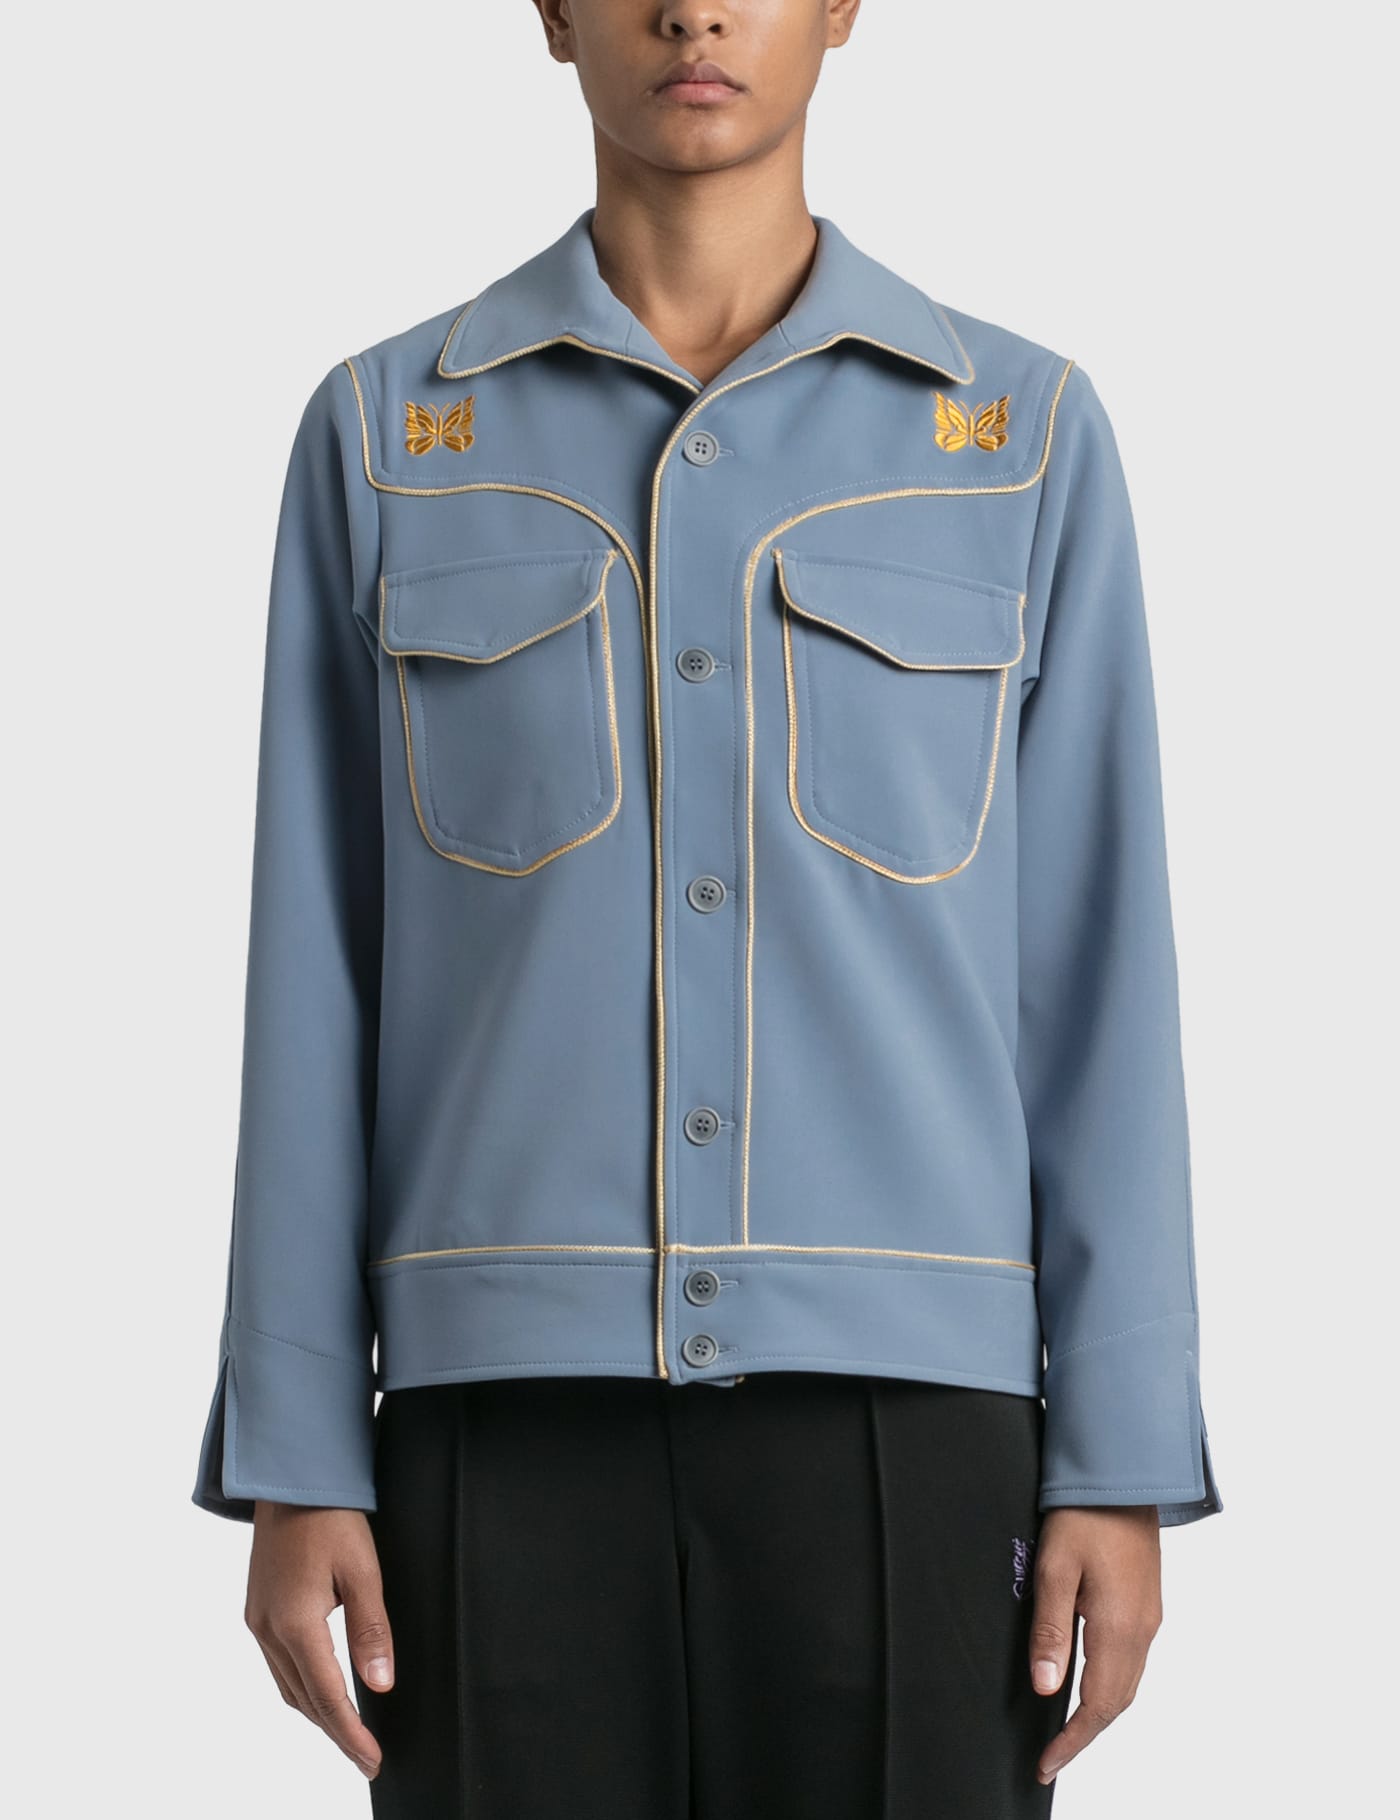 Needles - Piping Cowboy Leisure Jacket | HBX - Globally Curated